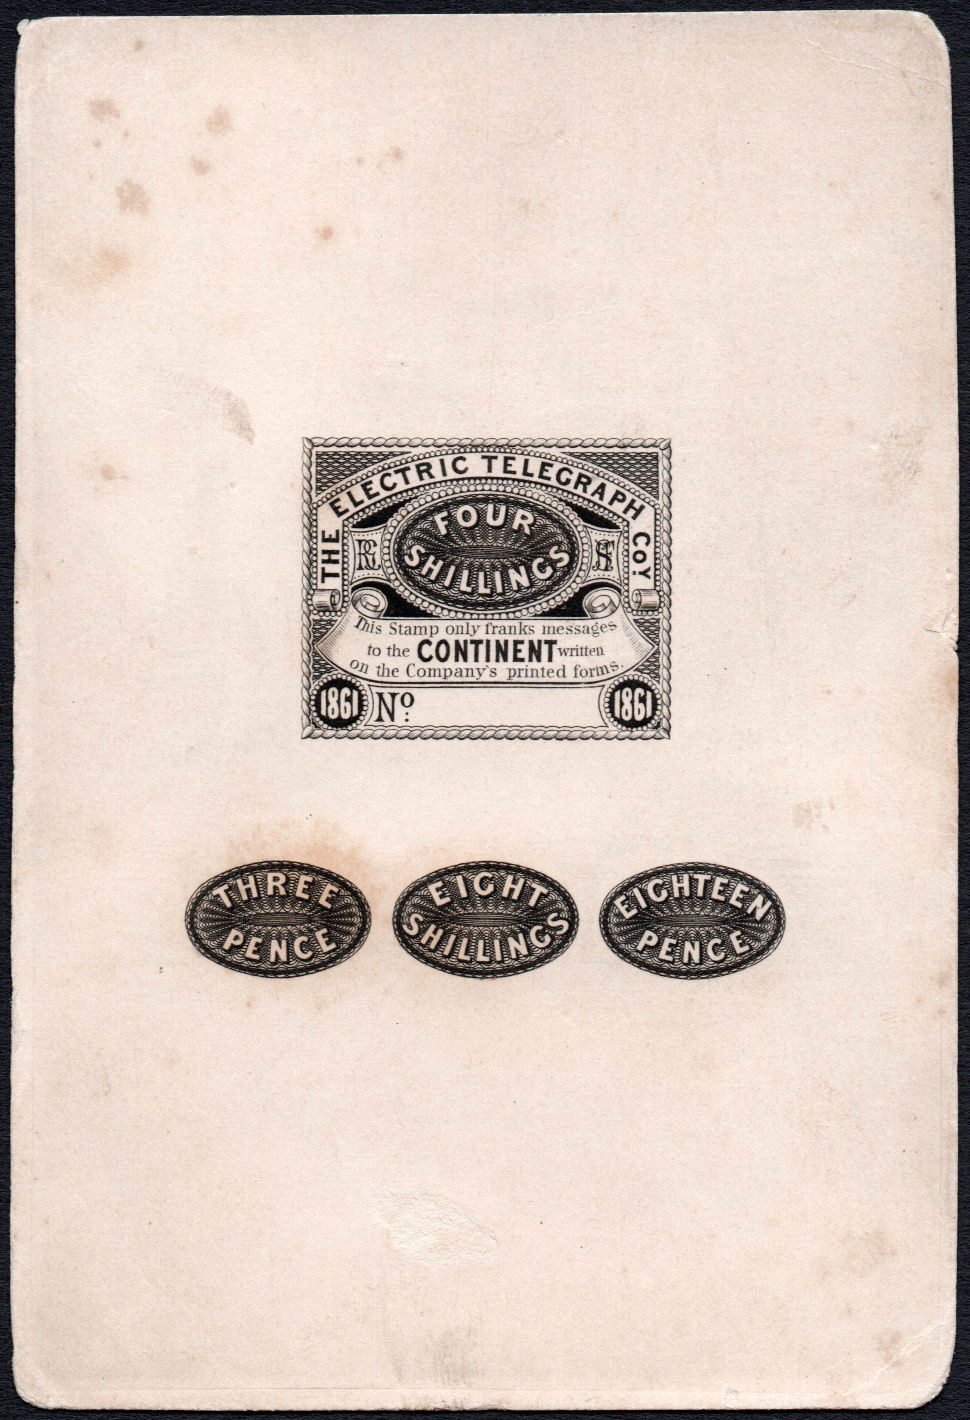 Electric Telegraph Company Continental Service Proofs.